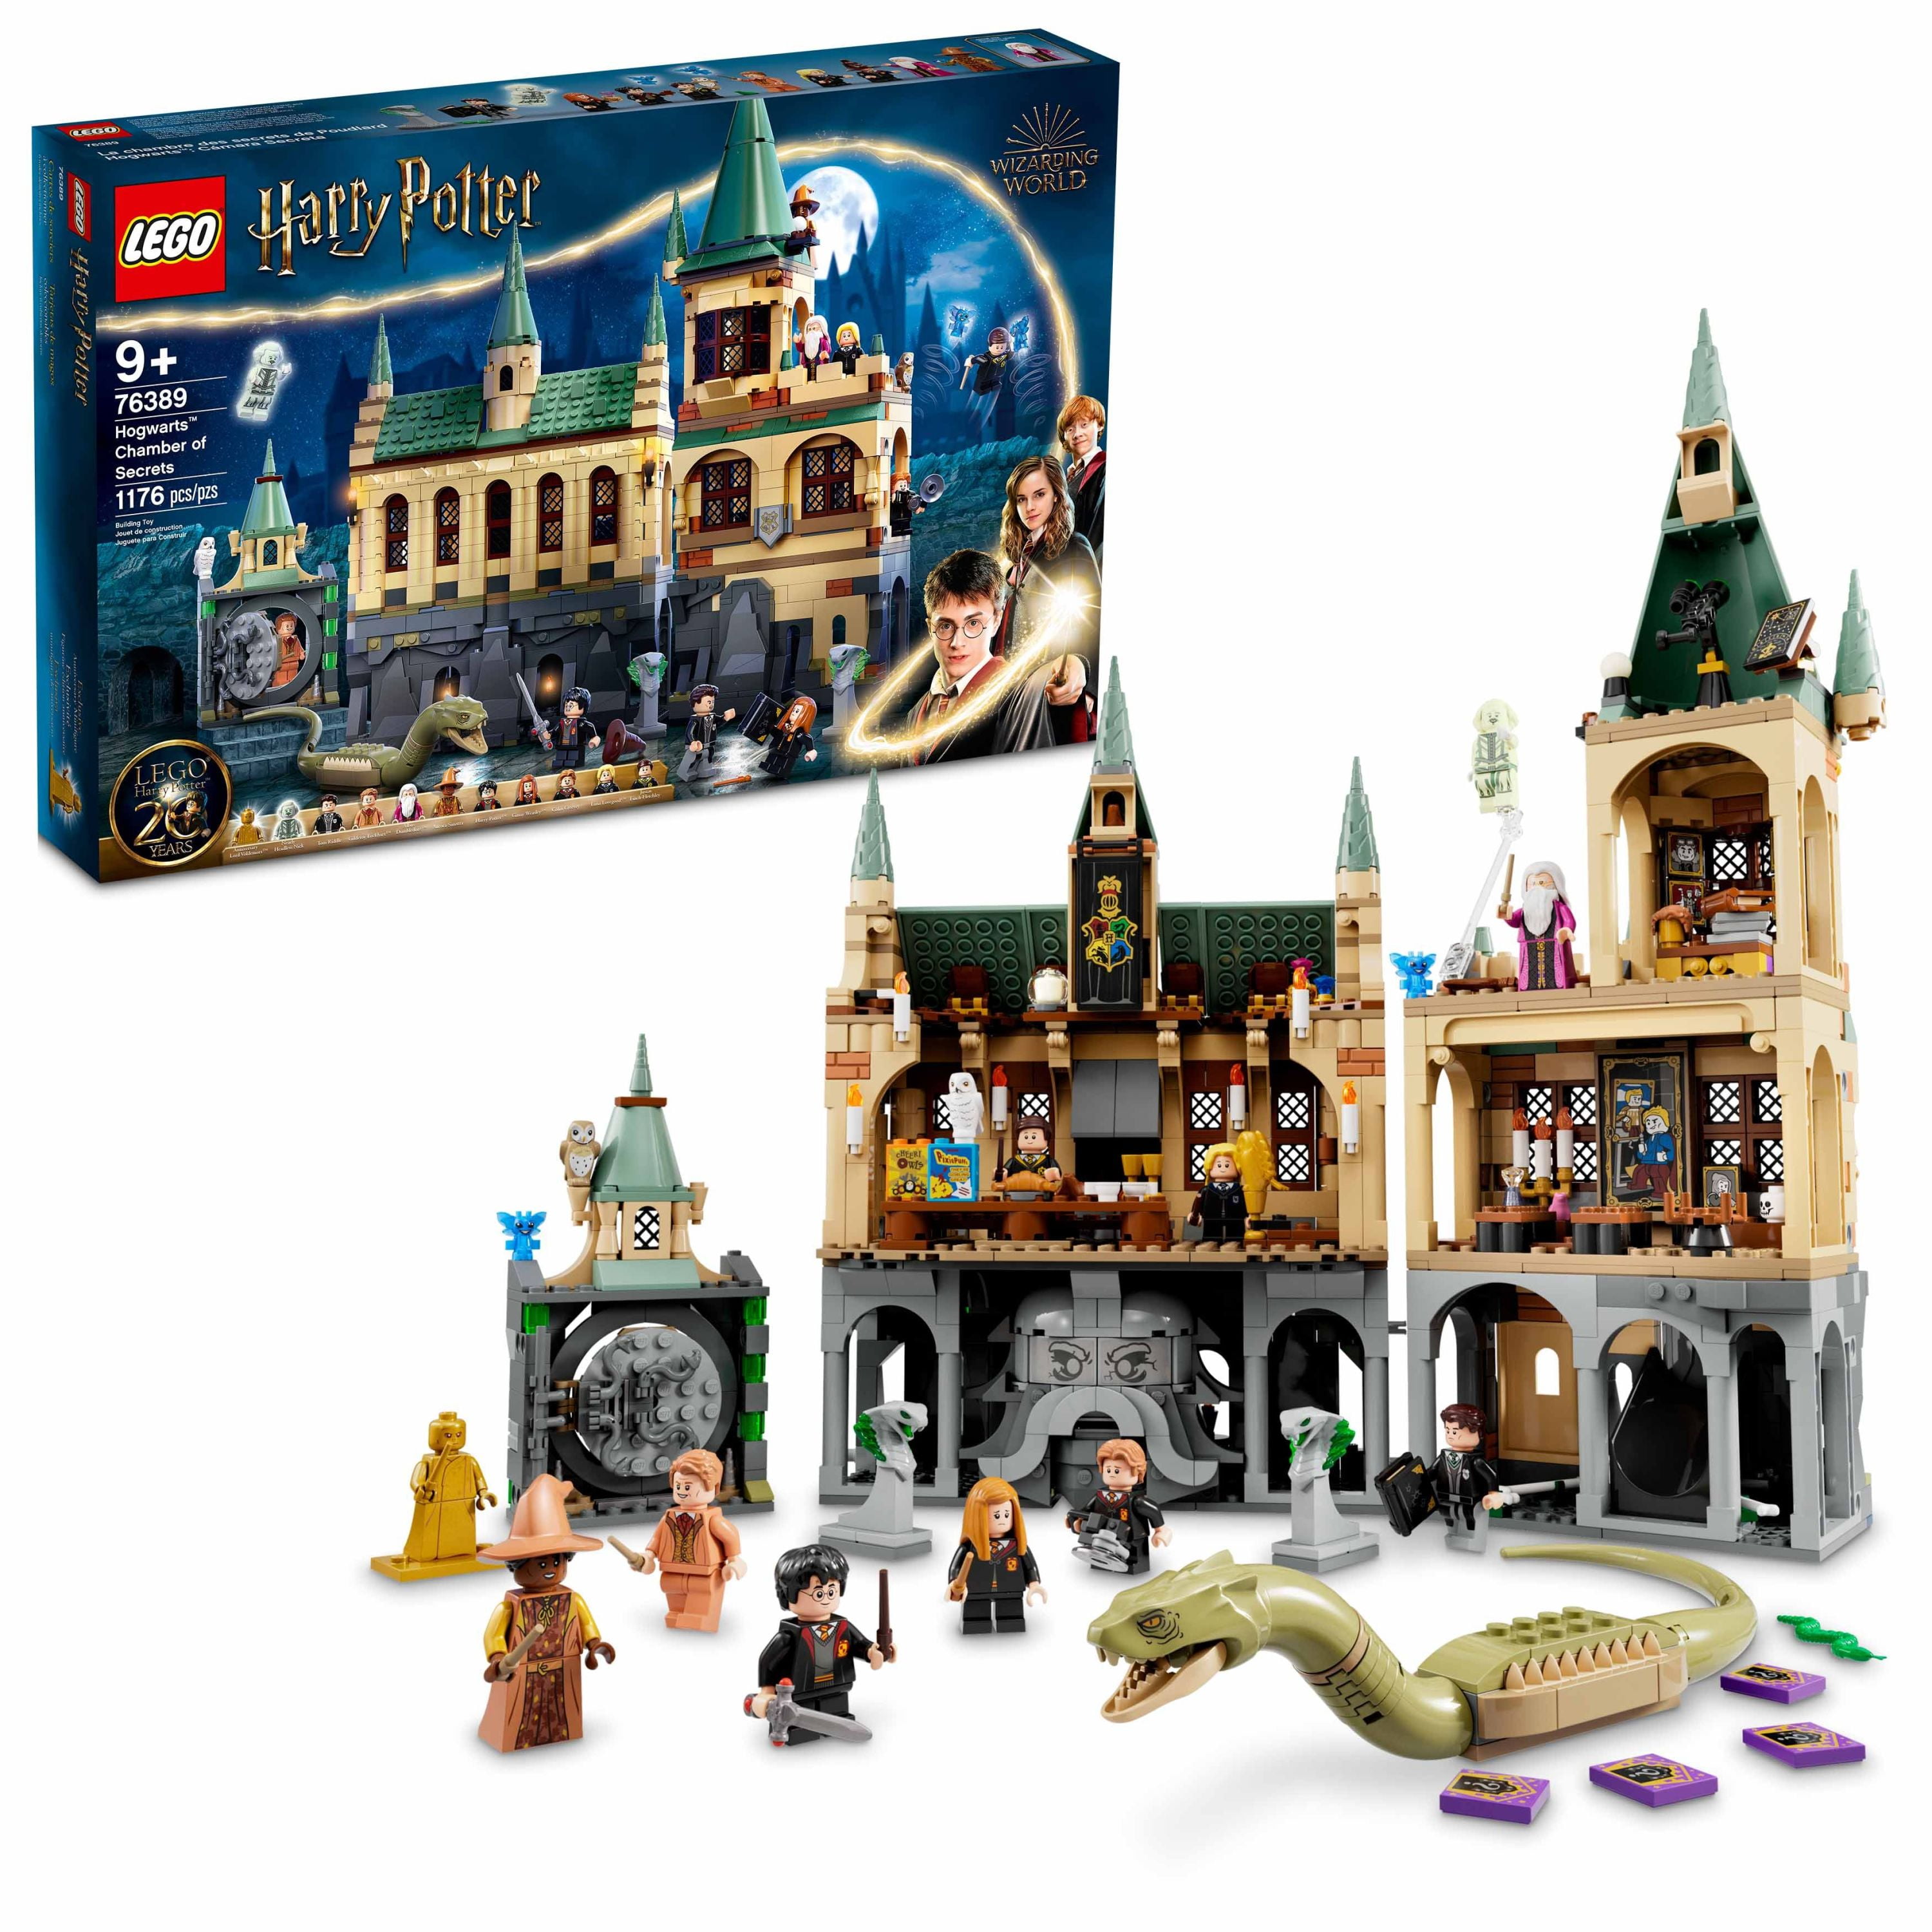 LEGO Harry Potter Hogwarts Chamber of Secrets 76389 Castle Toy with The Great Hall, 20th Anniversary Model Set with Collectible Golden Voldemort Minifigure and Glow-in-the-Dark Nearly Headless Nick -